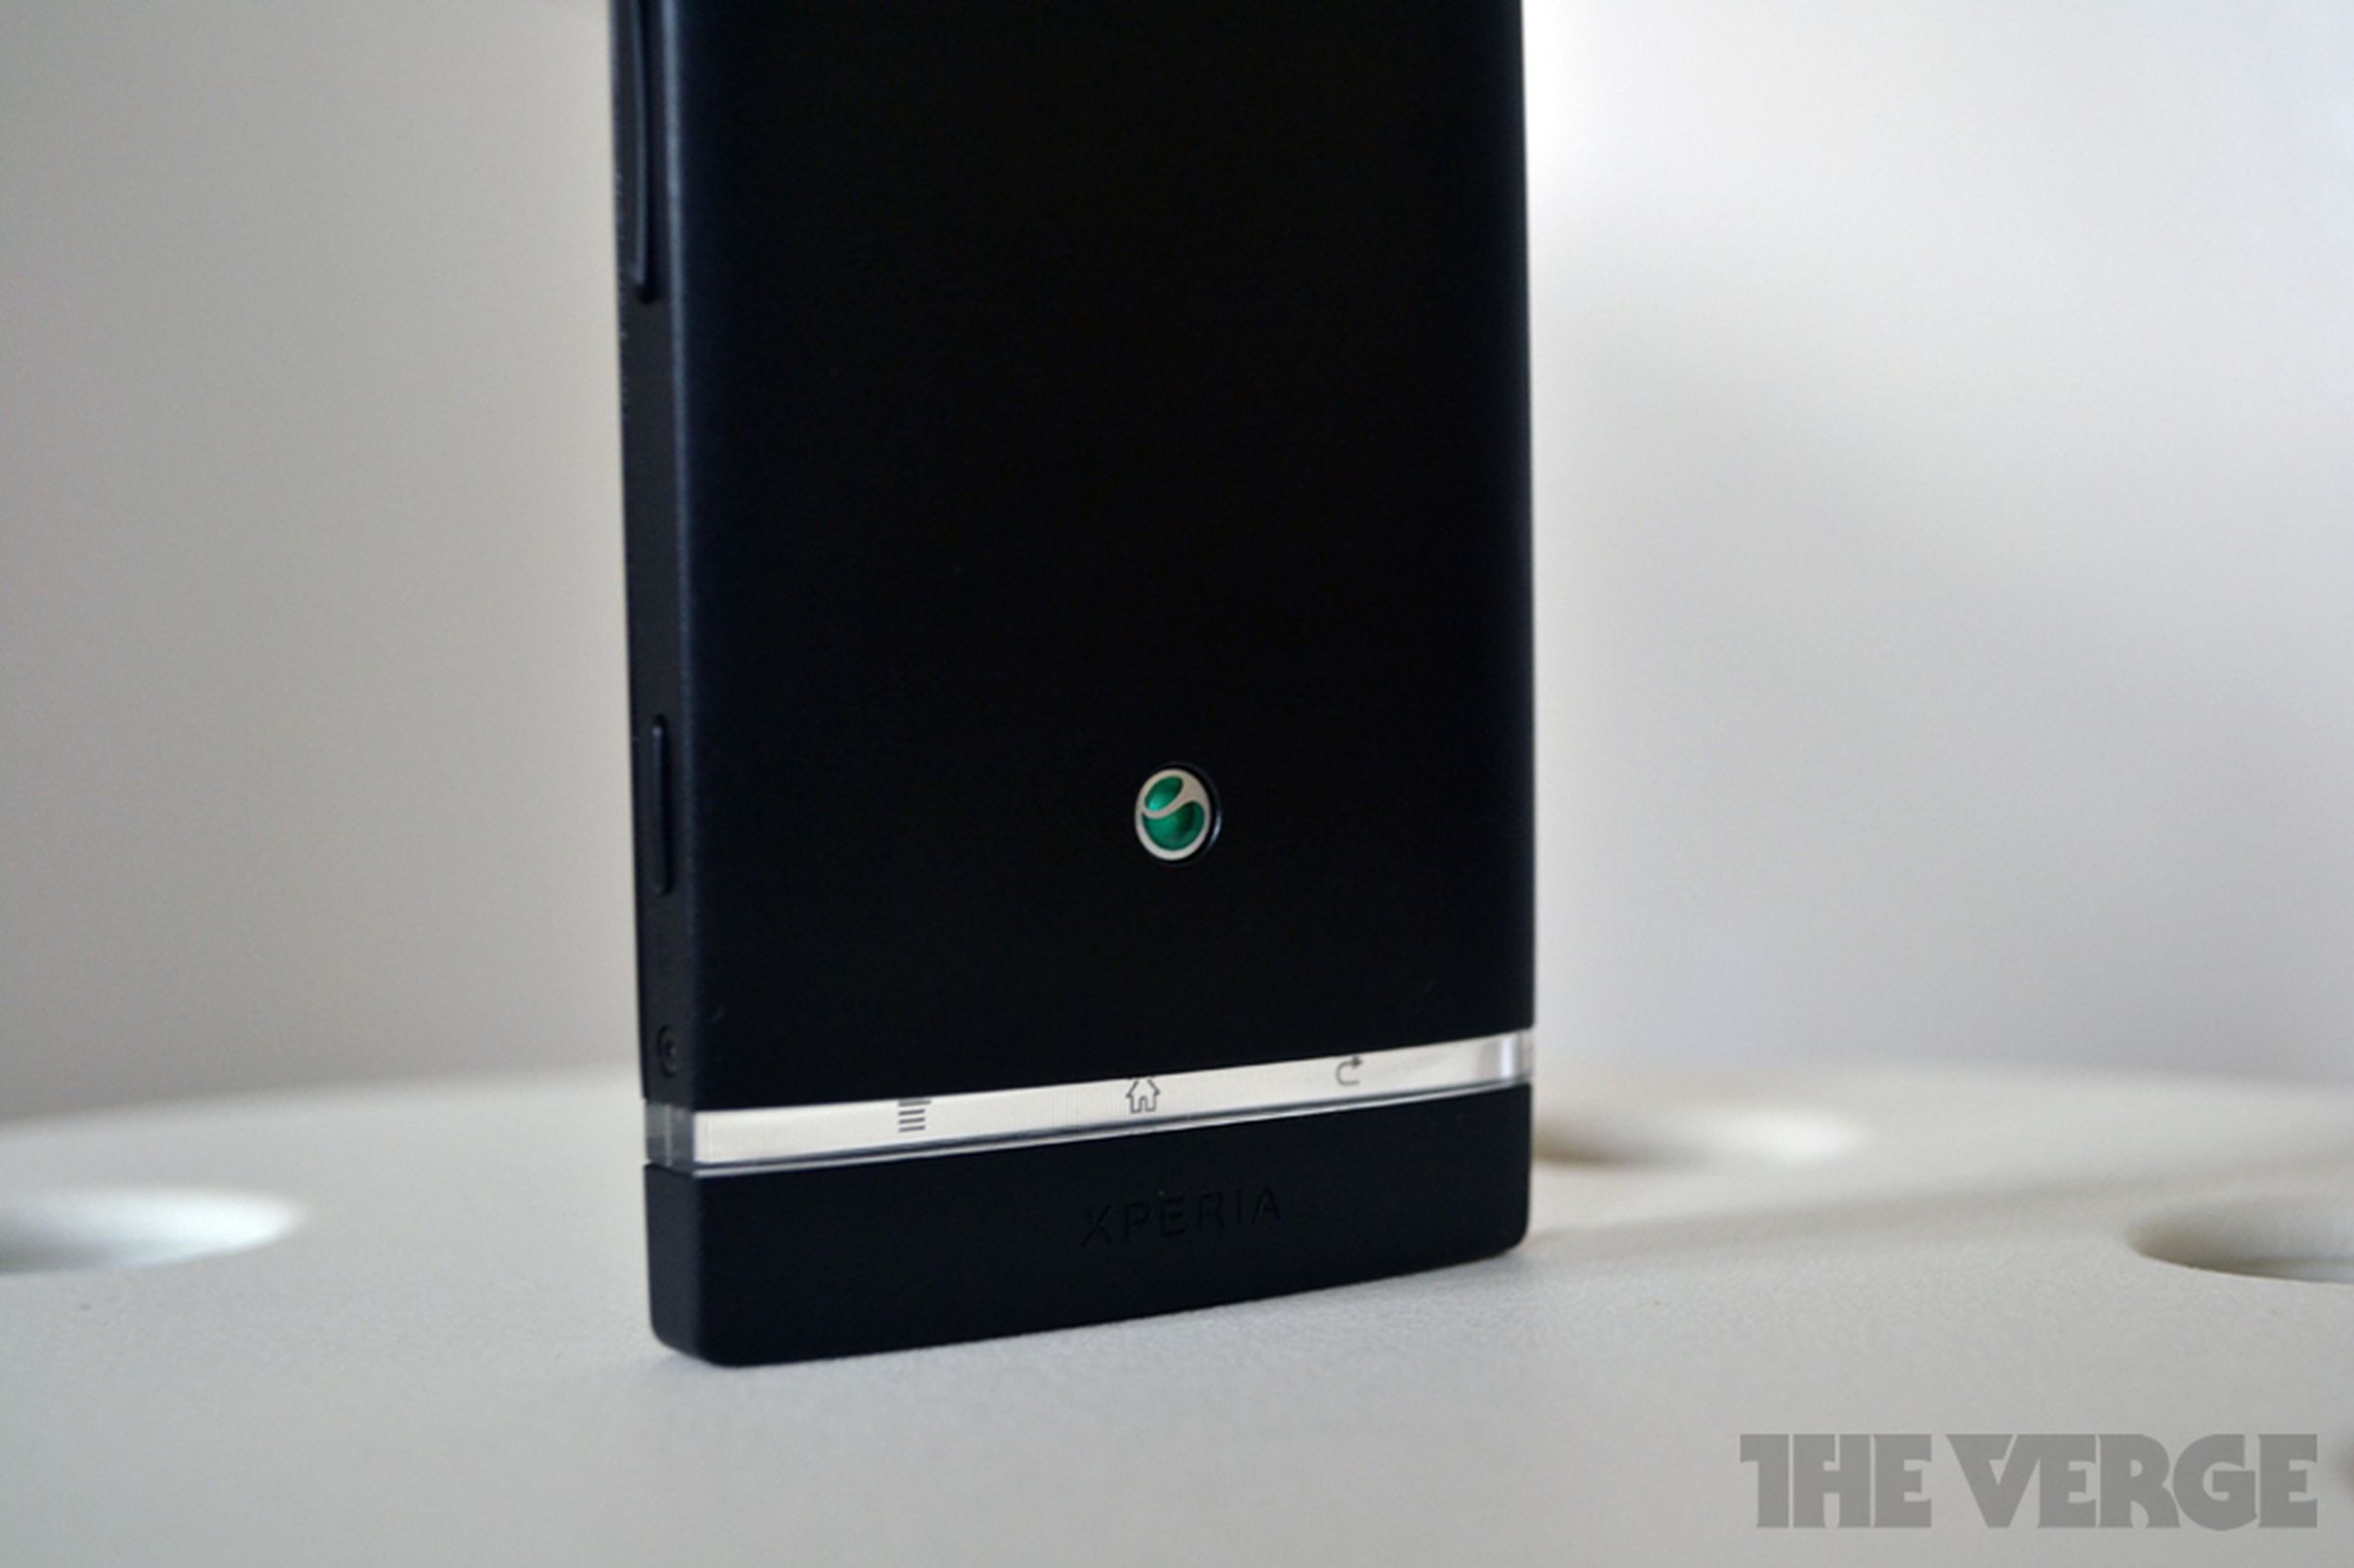 Xperia P hands-on images